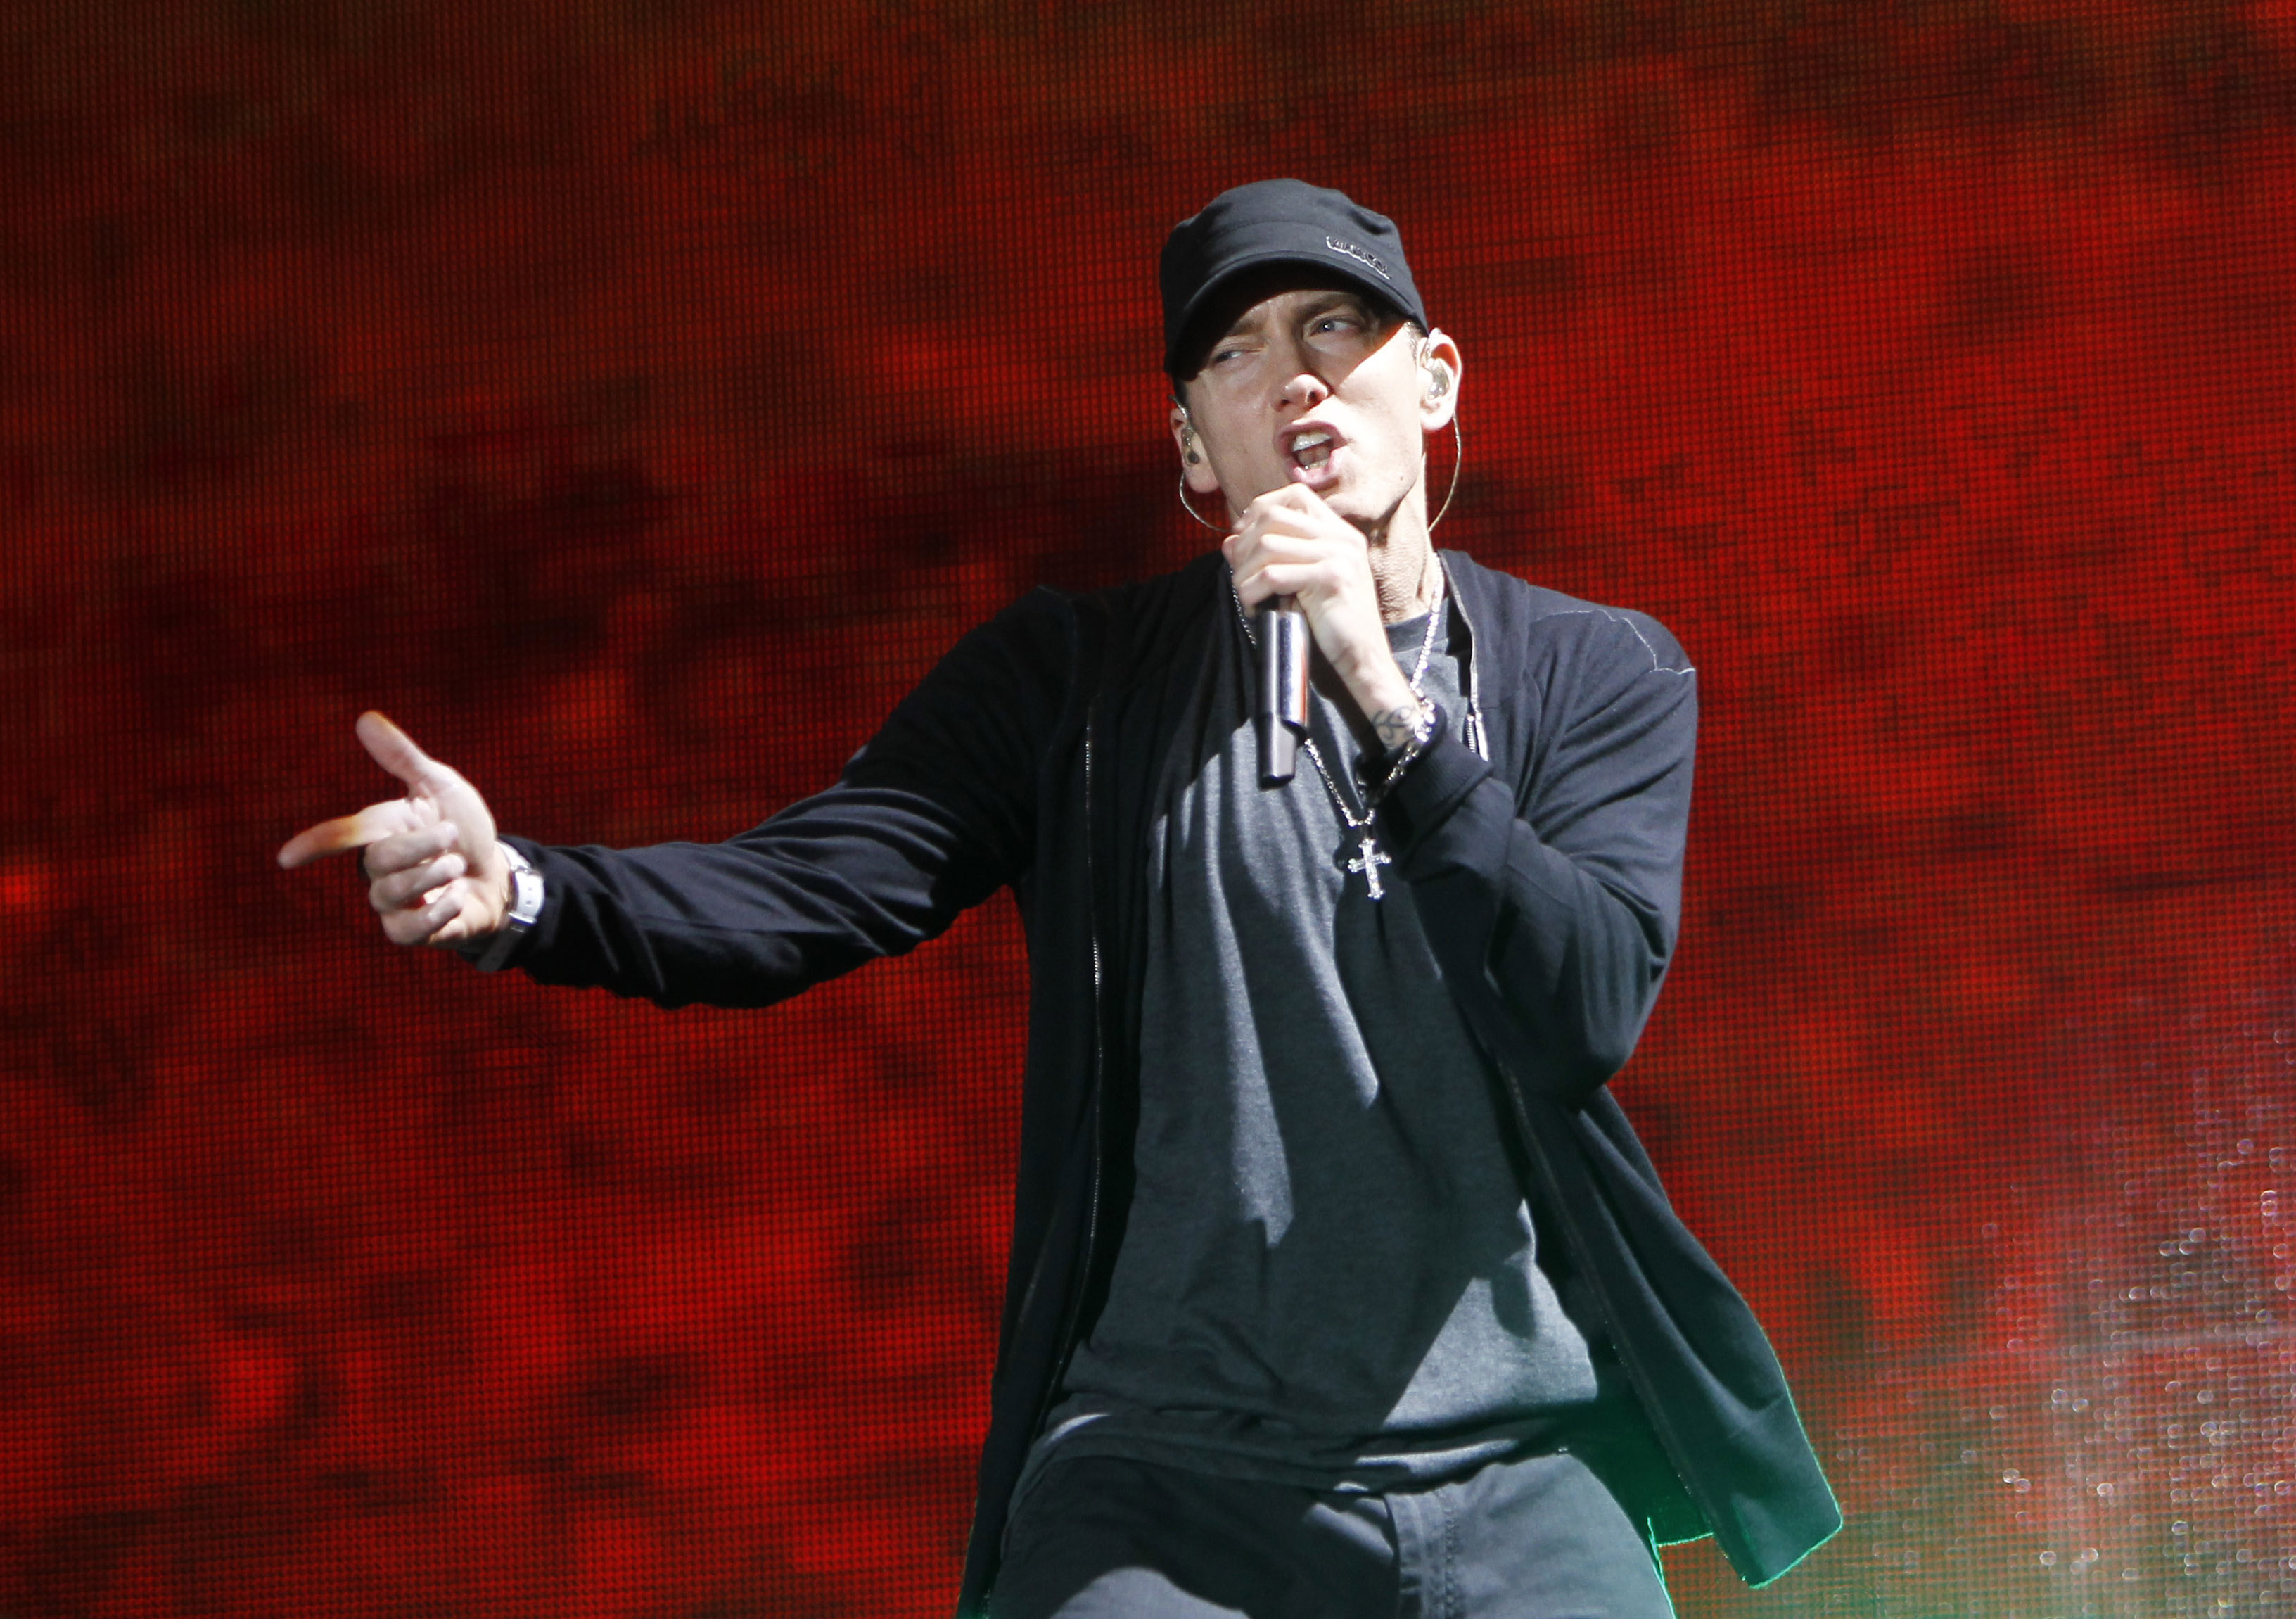 Eminem announces new album with manic 8-minute 'Campaign Speech' bashing Trump - Business Insider